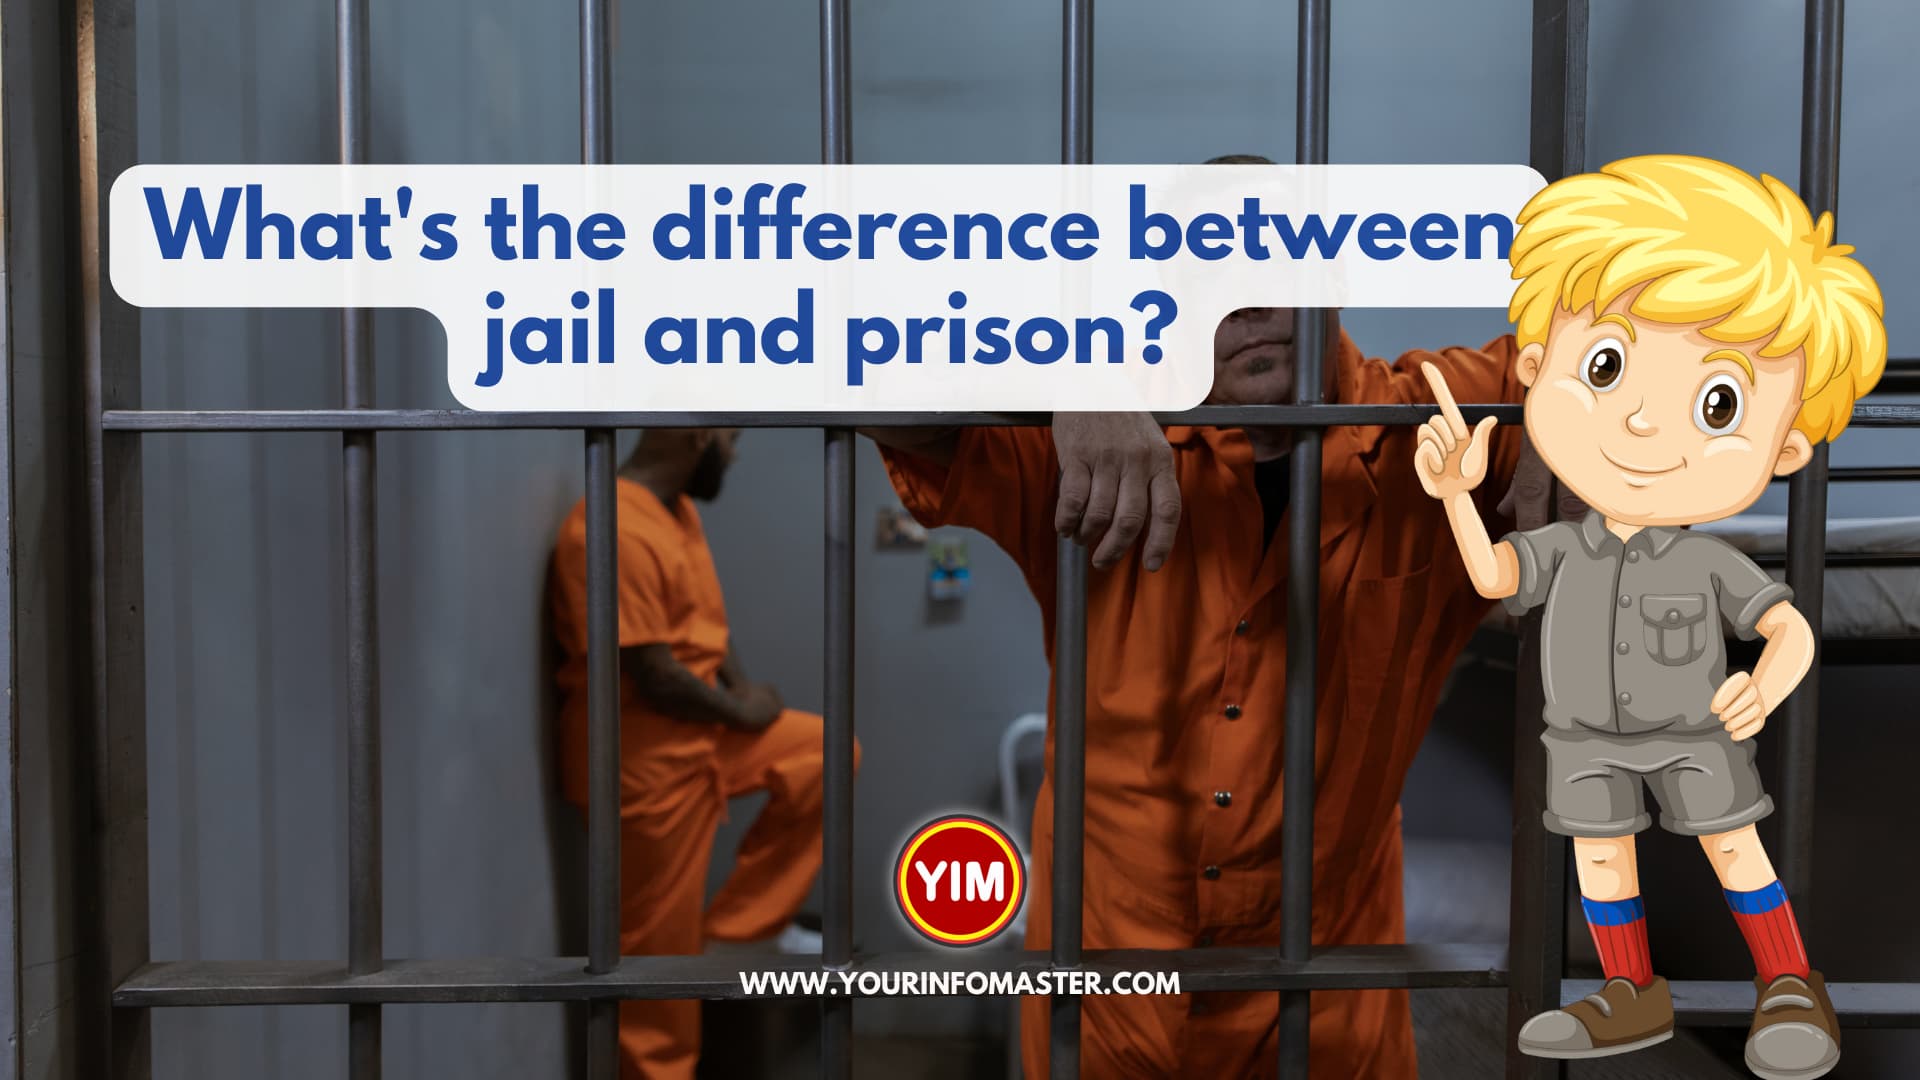 What's the difference between jail and prison